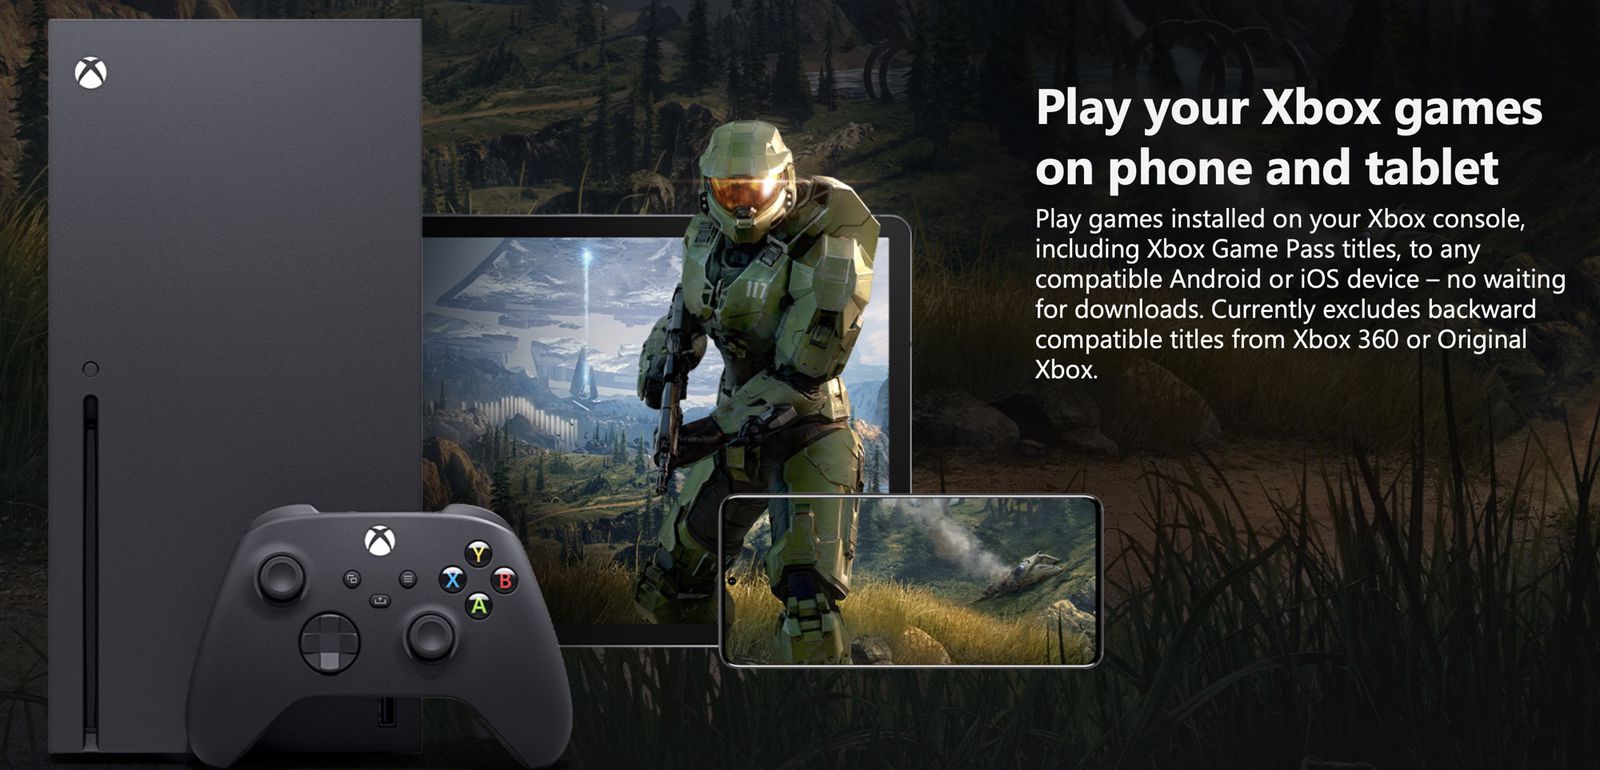 The new Xbox app lets you play Xbox One games on your iPhone or iPad